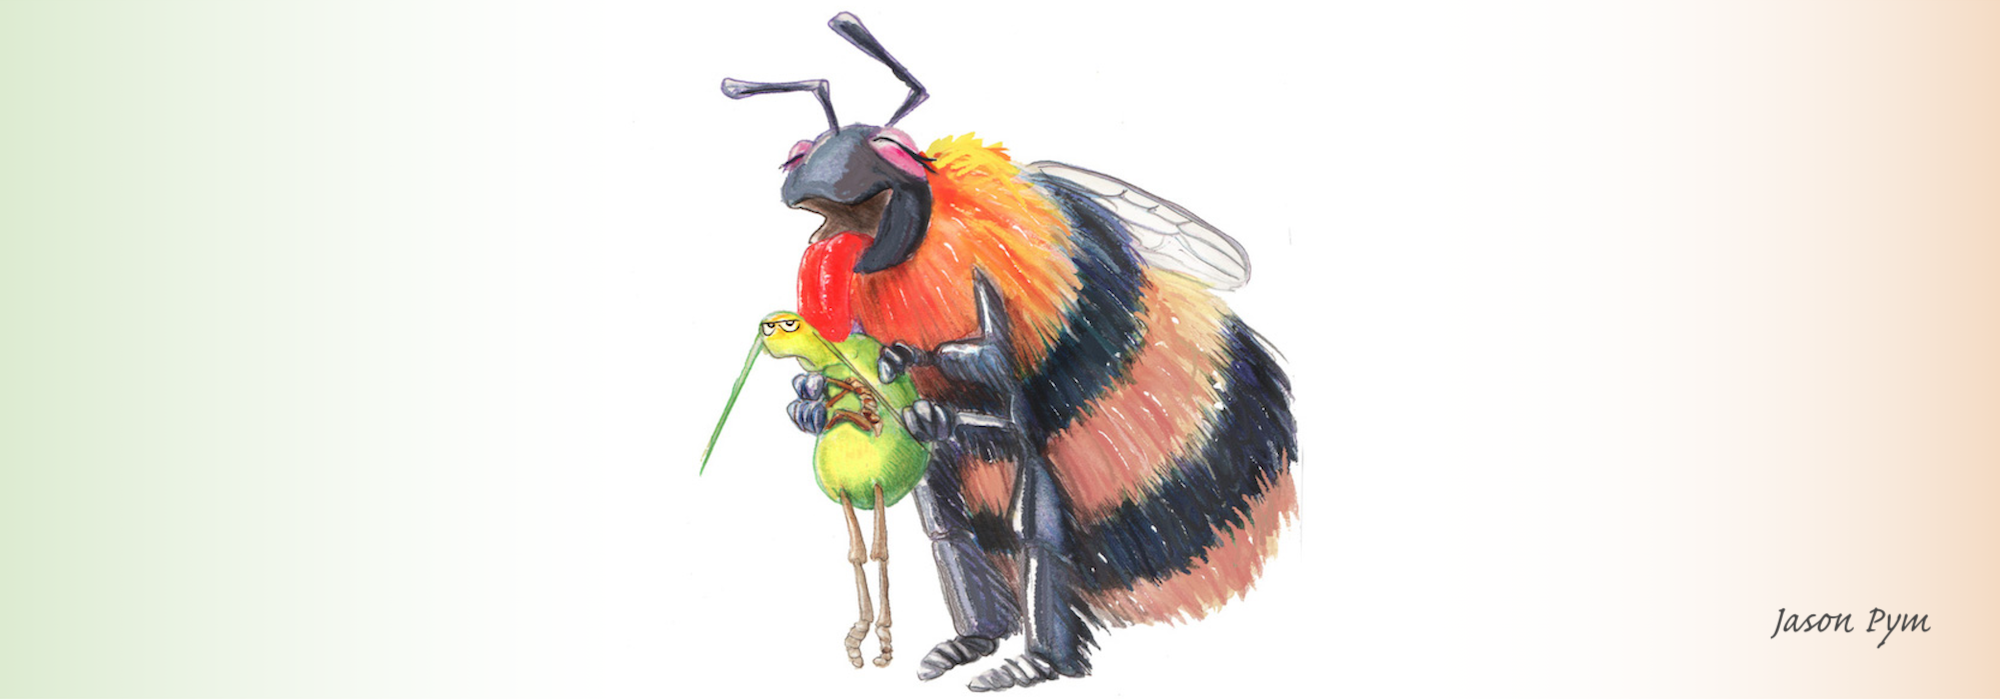 Jason Pym illustration of a bee licking an aphid